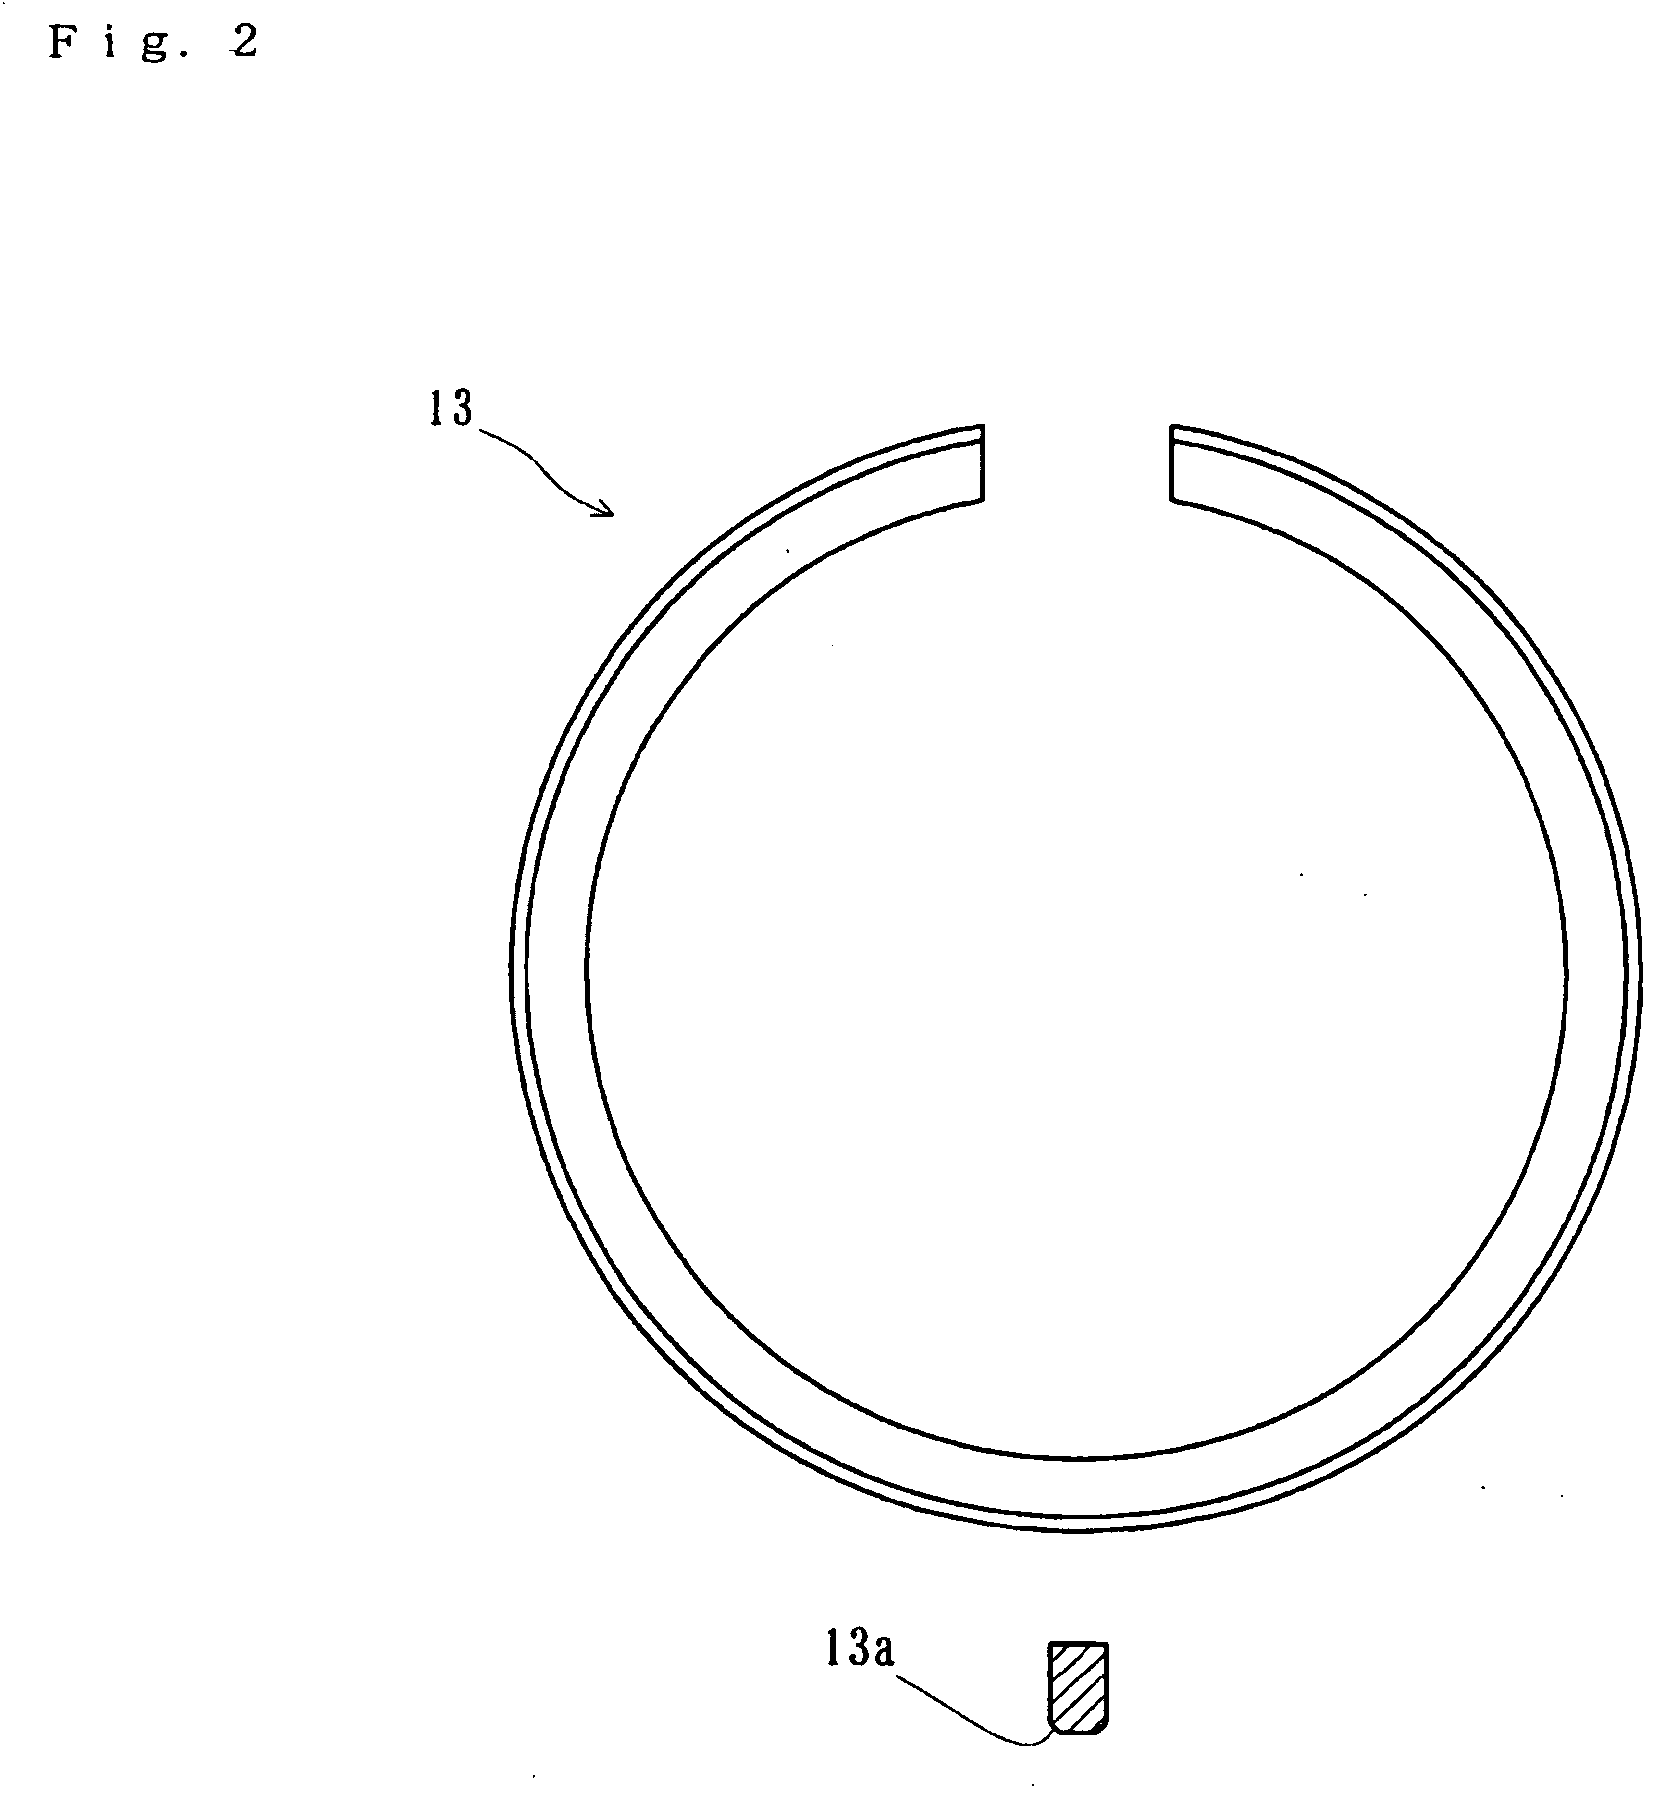 Bearing apparatus for a wheel of vehicle